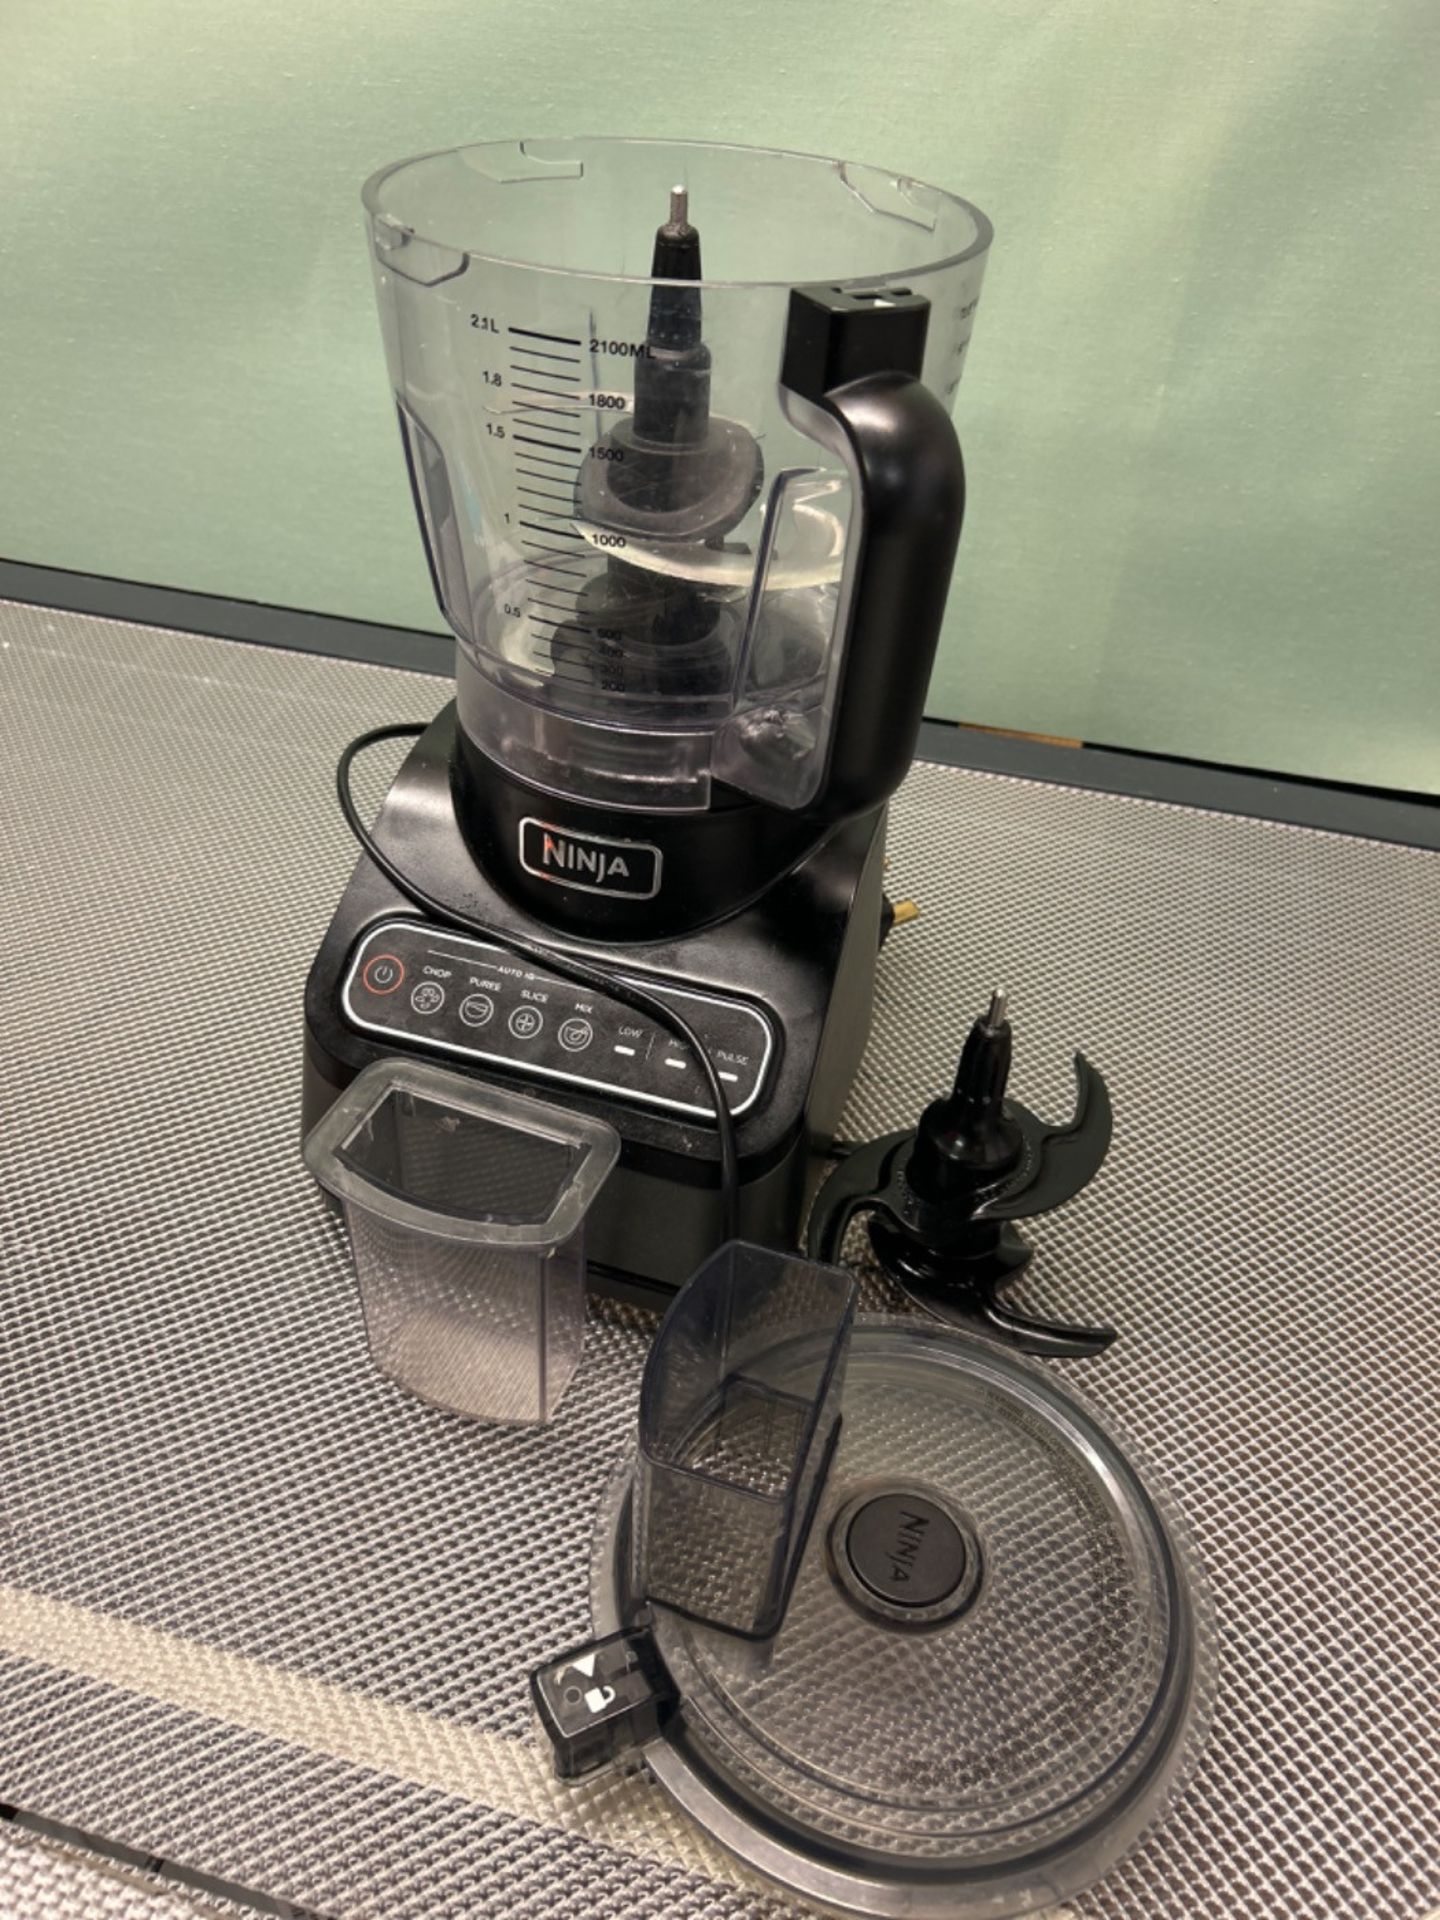 Ninja Food Processor with 4 Automatic Programs; Chop, Puree, Slice, Mix, and 3 Manual Speeds, 2.1L  - Image 3 of 3